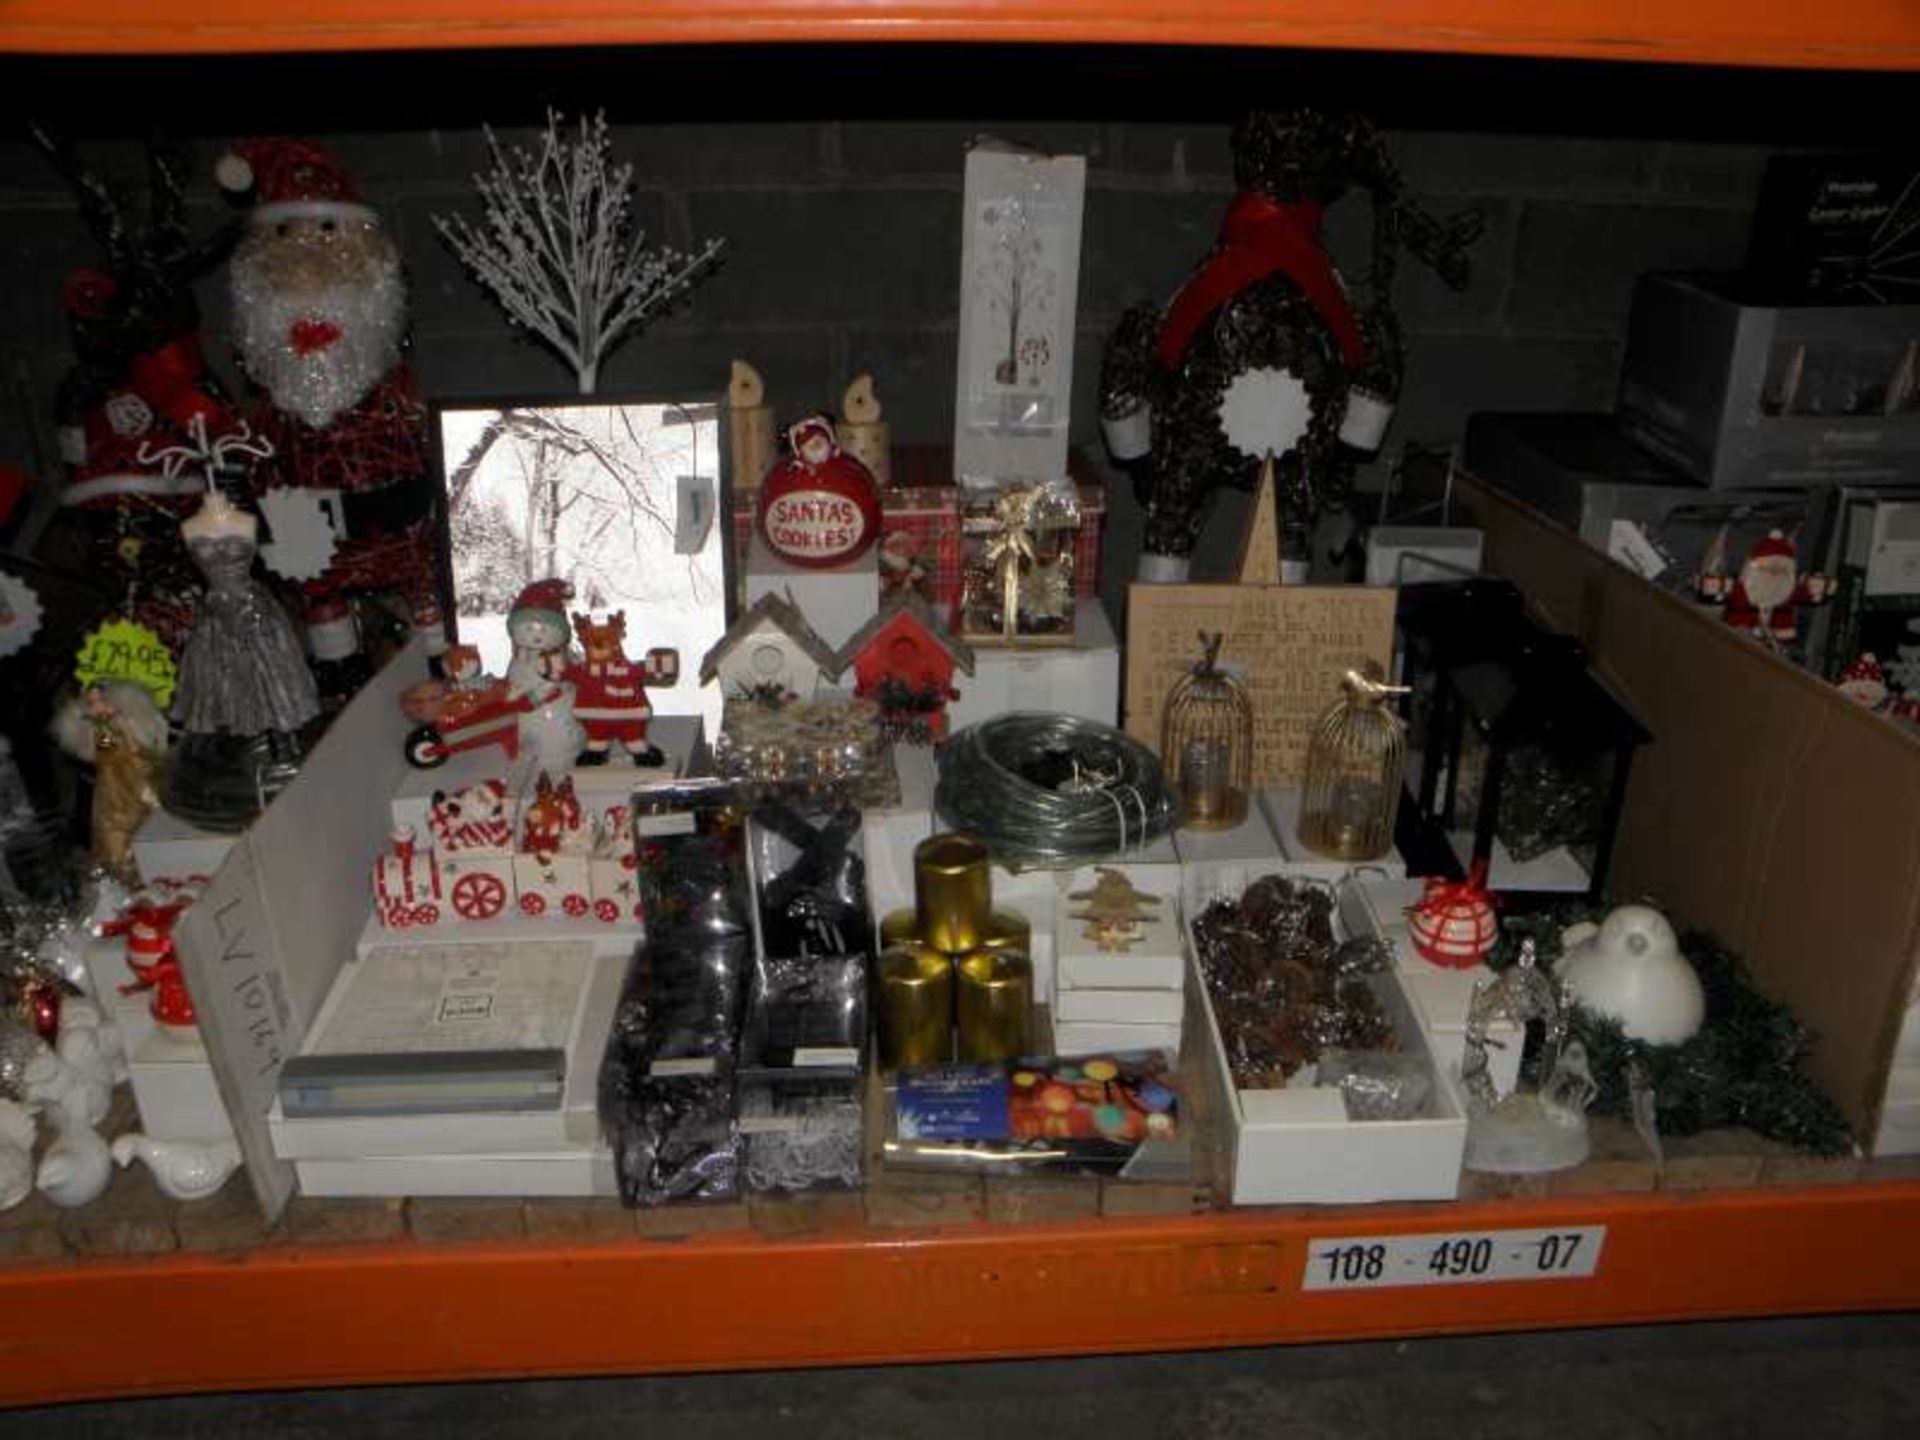 PREMIER CHRISTMAS LOT CONTAINING CANDLES, CANDLE HOLDERS, LANTERNS, BIRD HOUSE, LIGHTS, GIFT